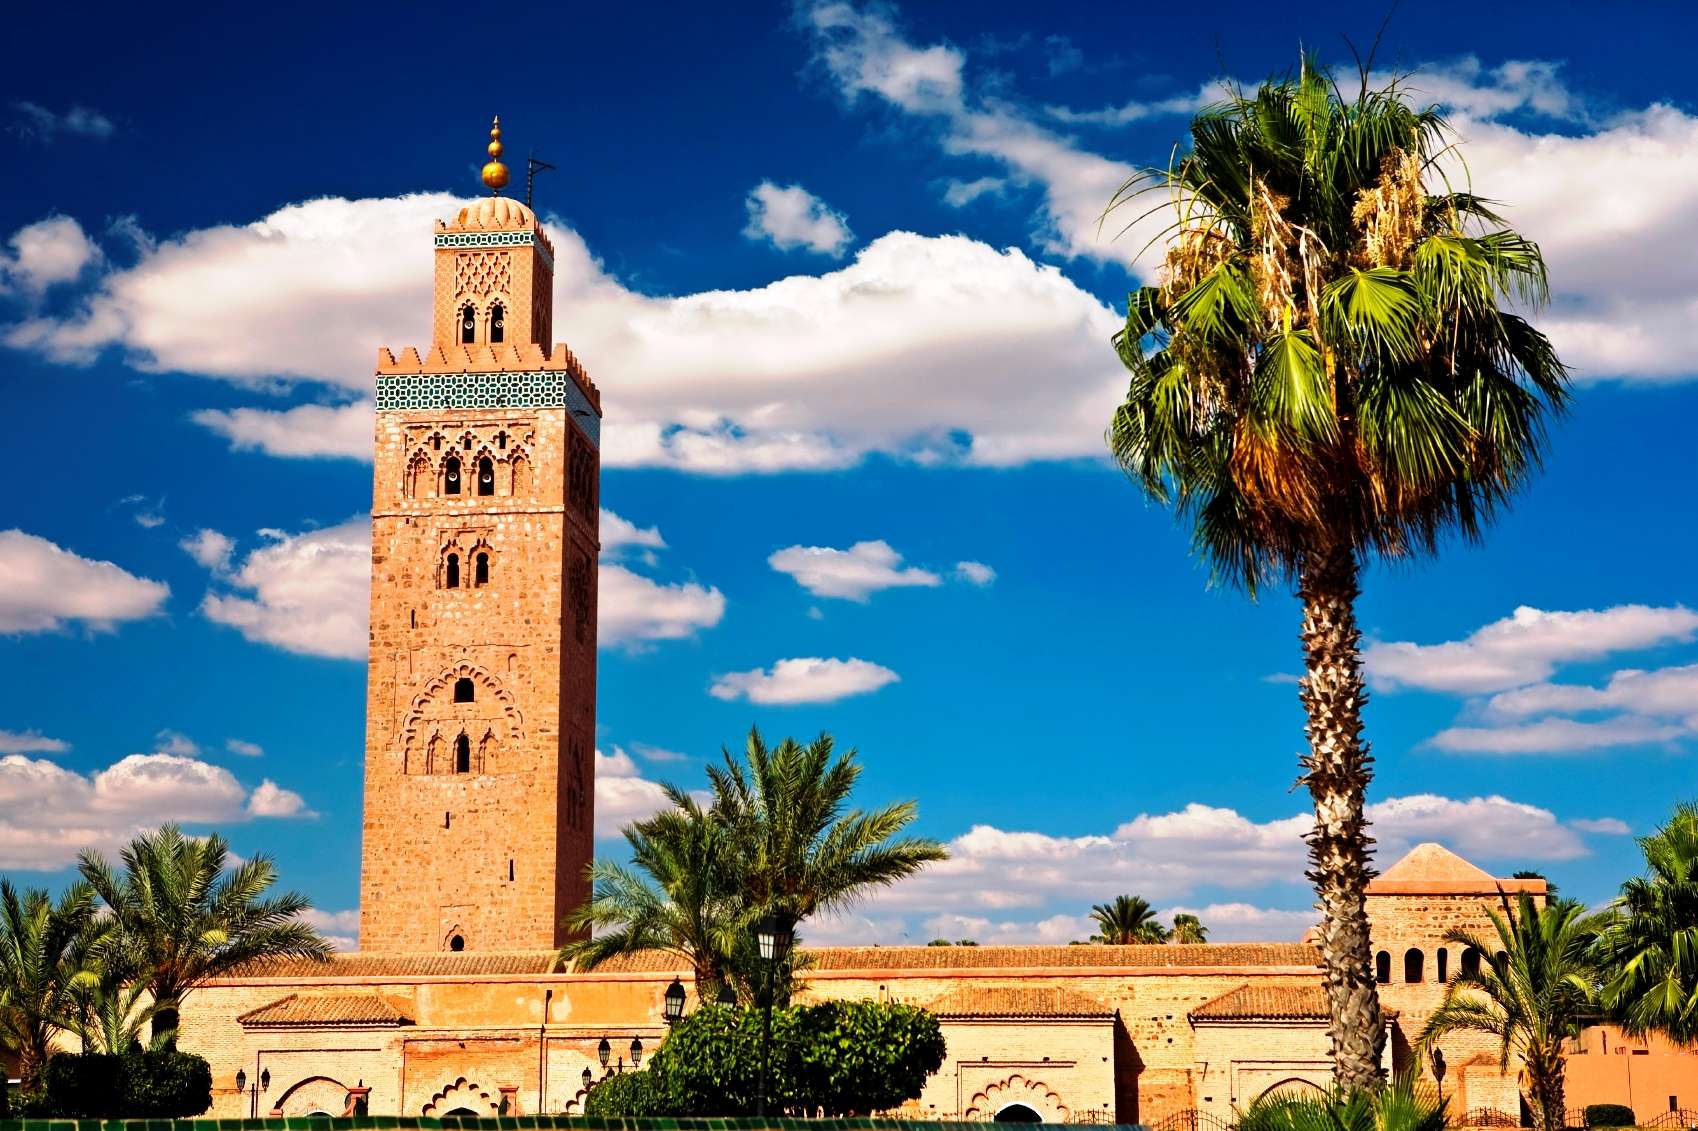 12 days enchanting Morocco tour from Marrakech to explore the treasures of Morocco